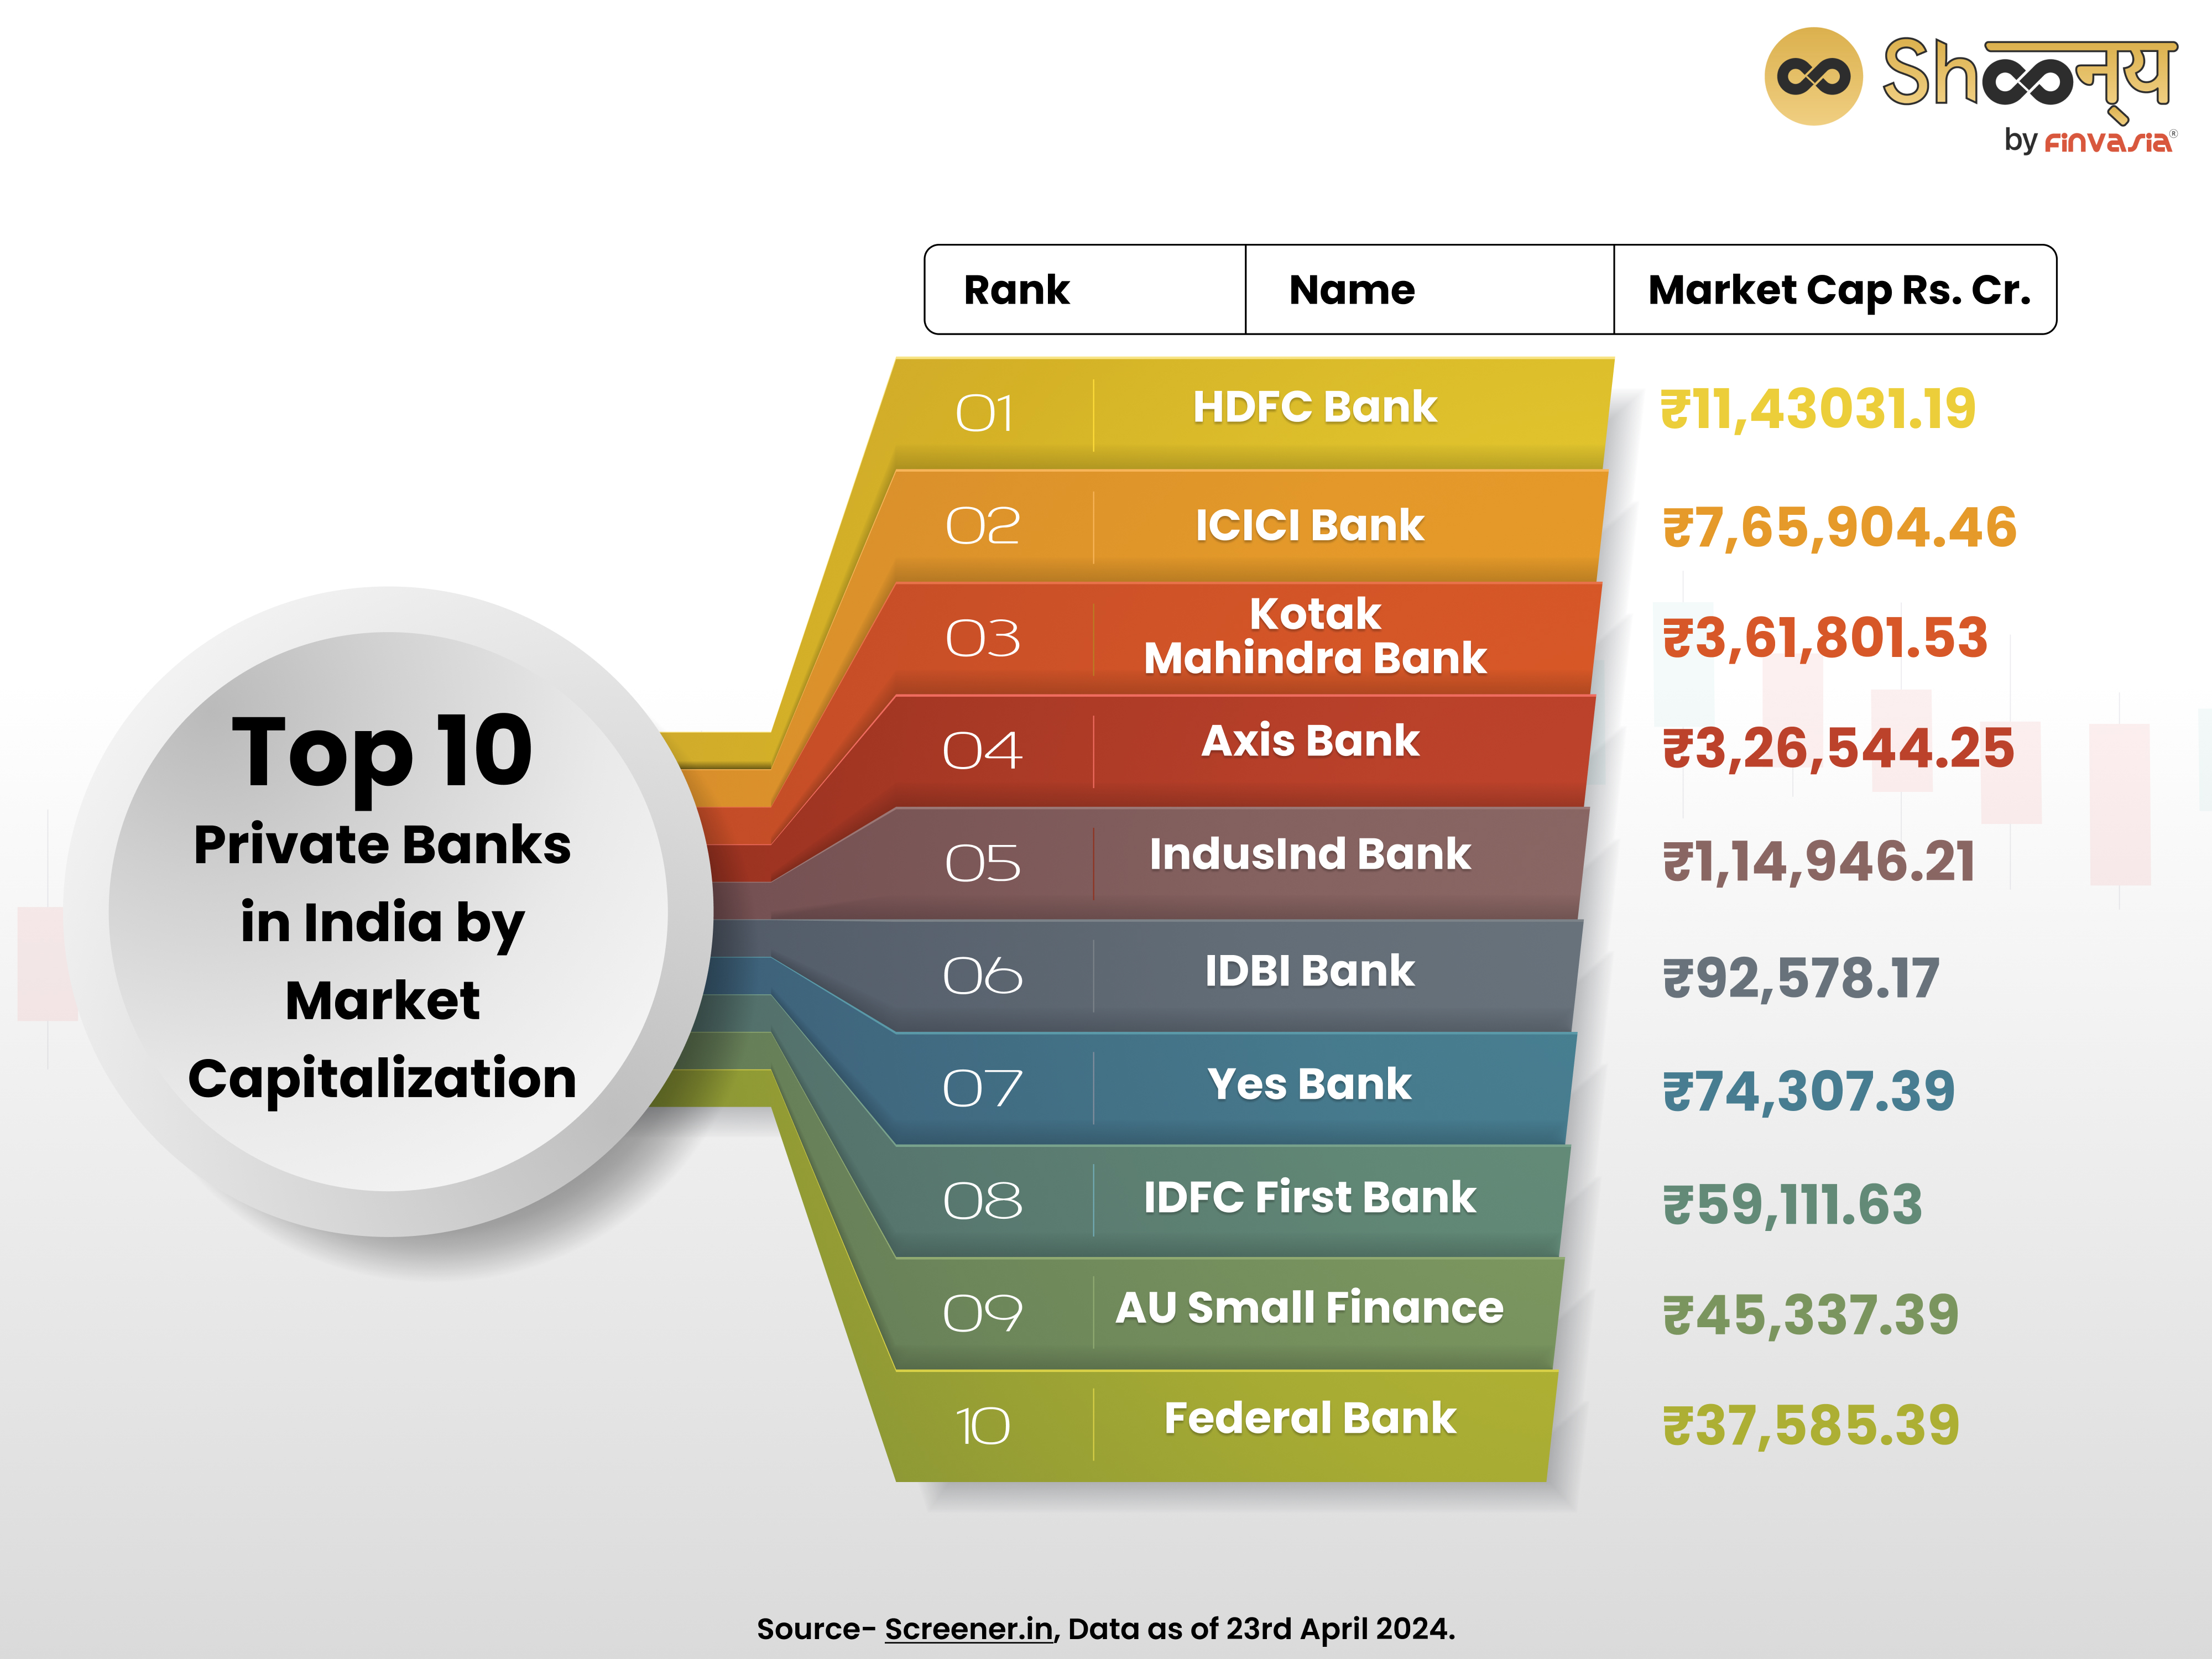 Top 10 Private Banks in India by Market Capitalization